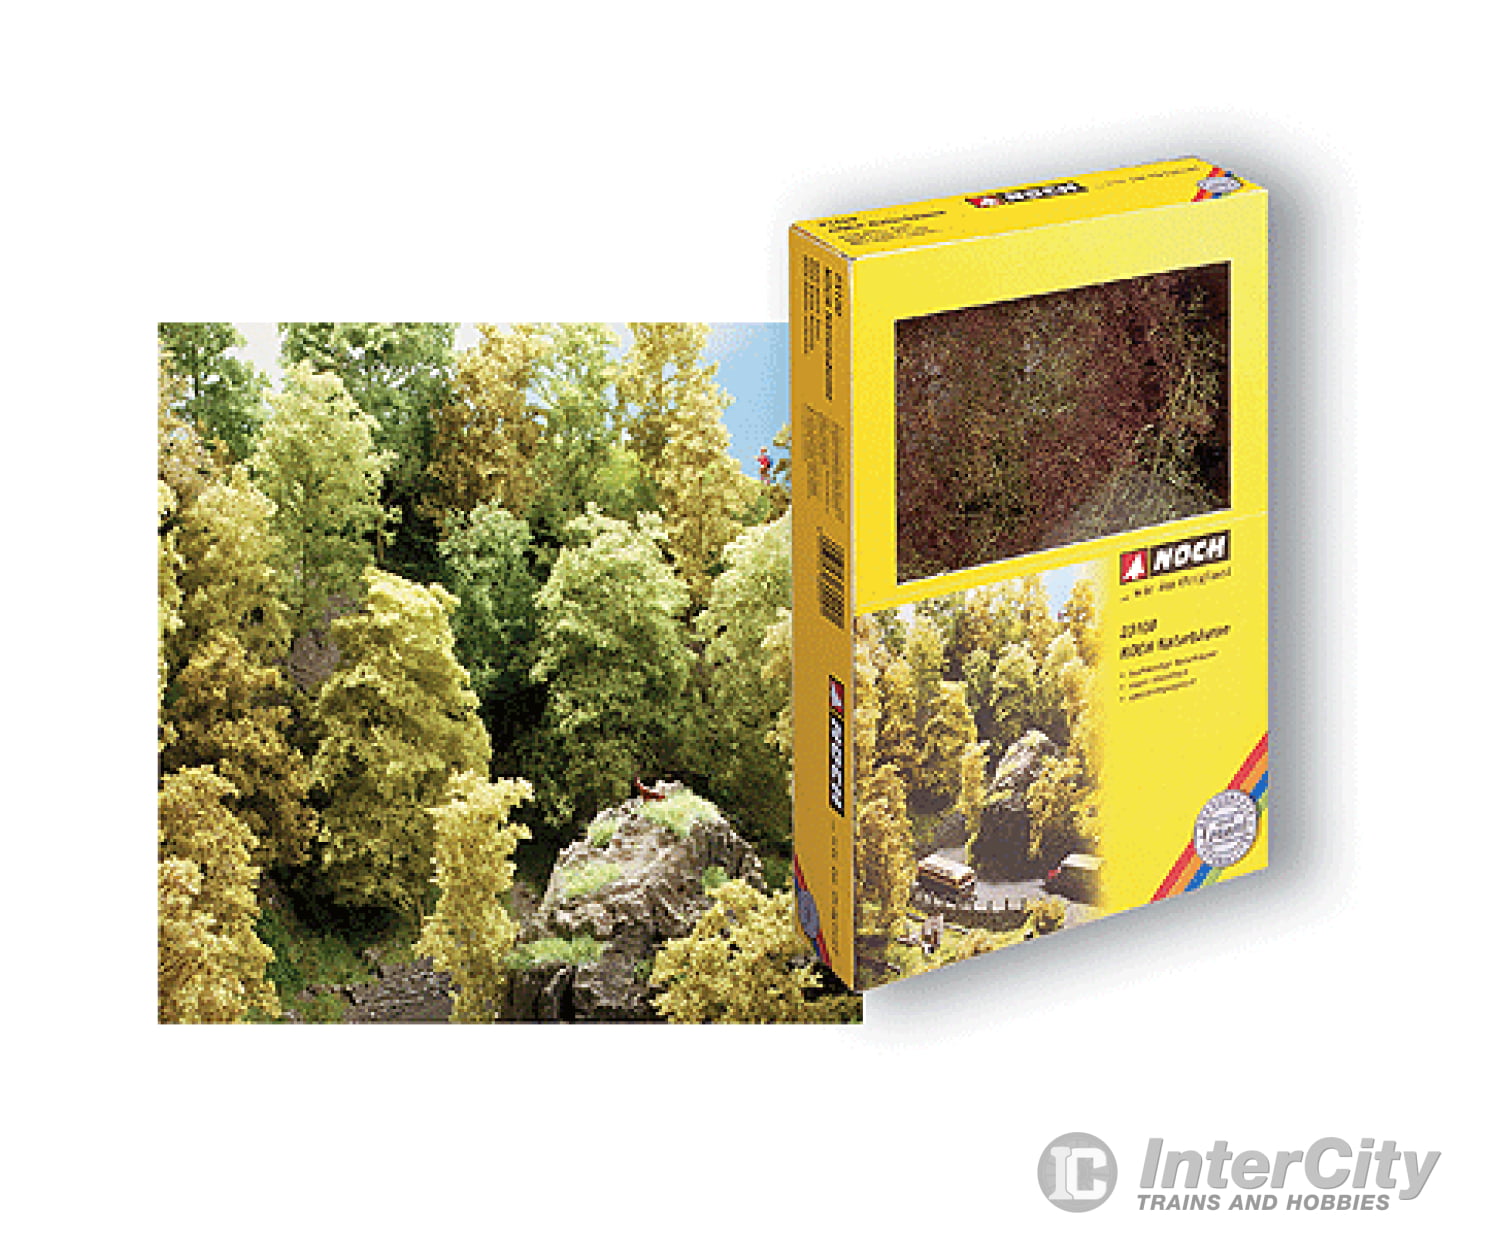 Noch 23100 Nature Trees Kit With Seafoam - Super Tree Making Material! Other Scenery